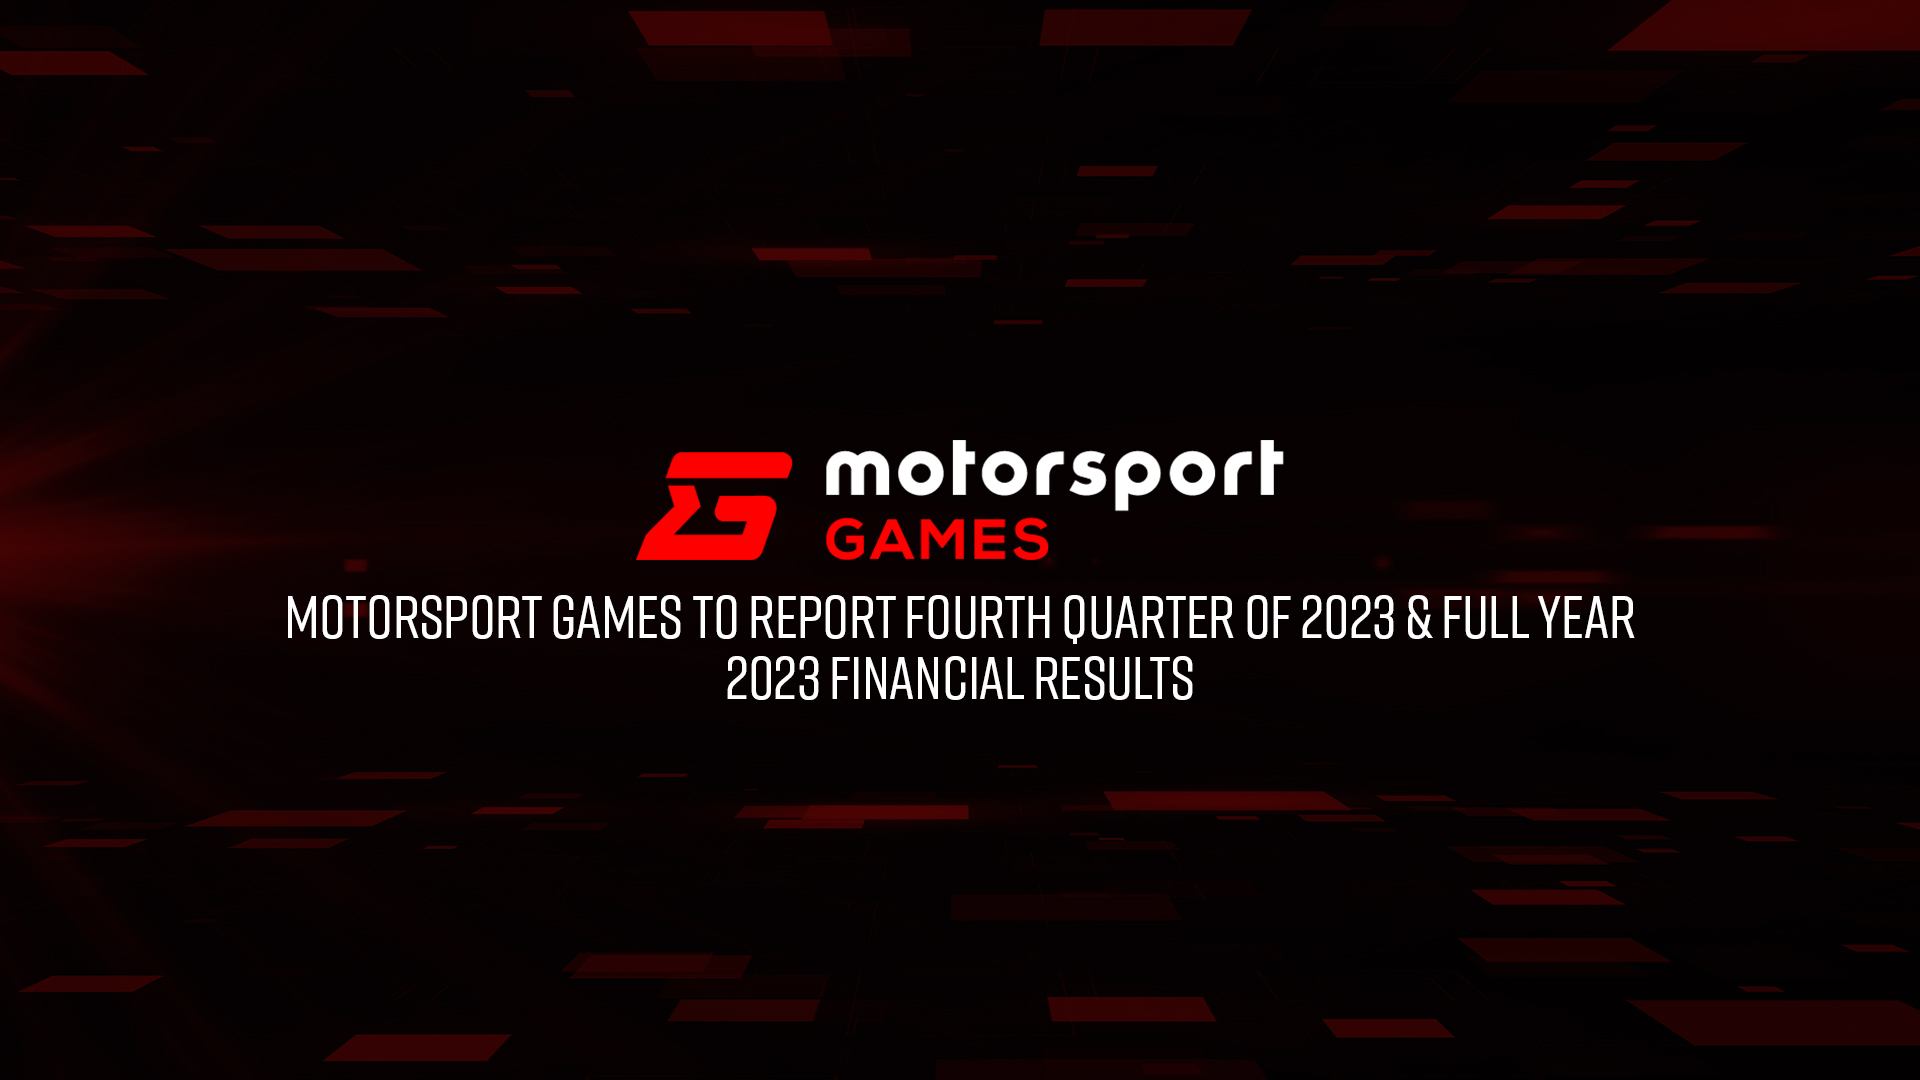 Motorsport Games to Report Fourth Quarter of 2023 & Full Year 2023 Financial Results